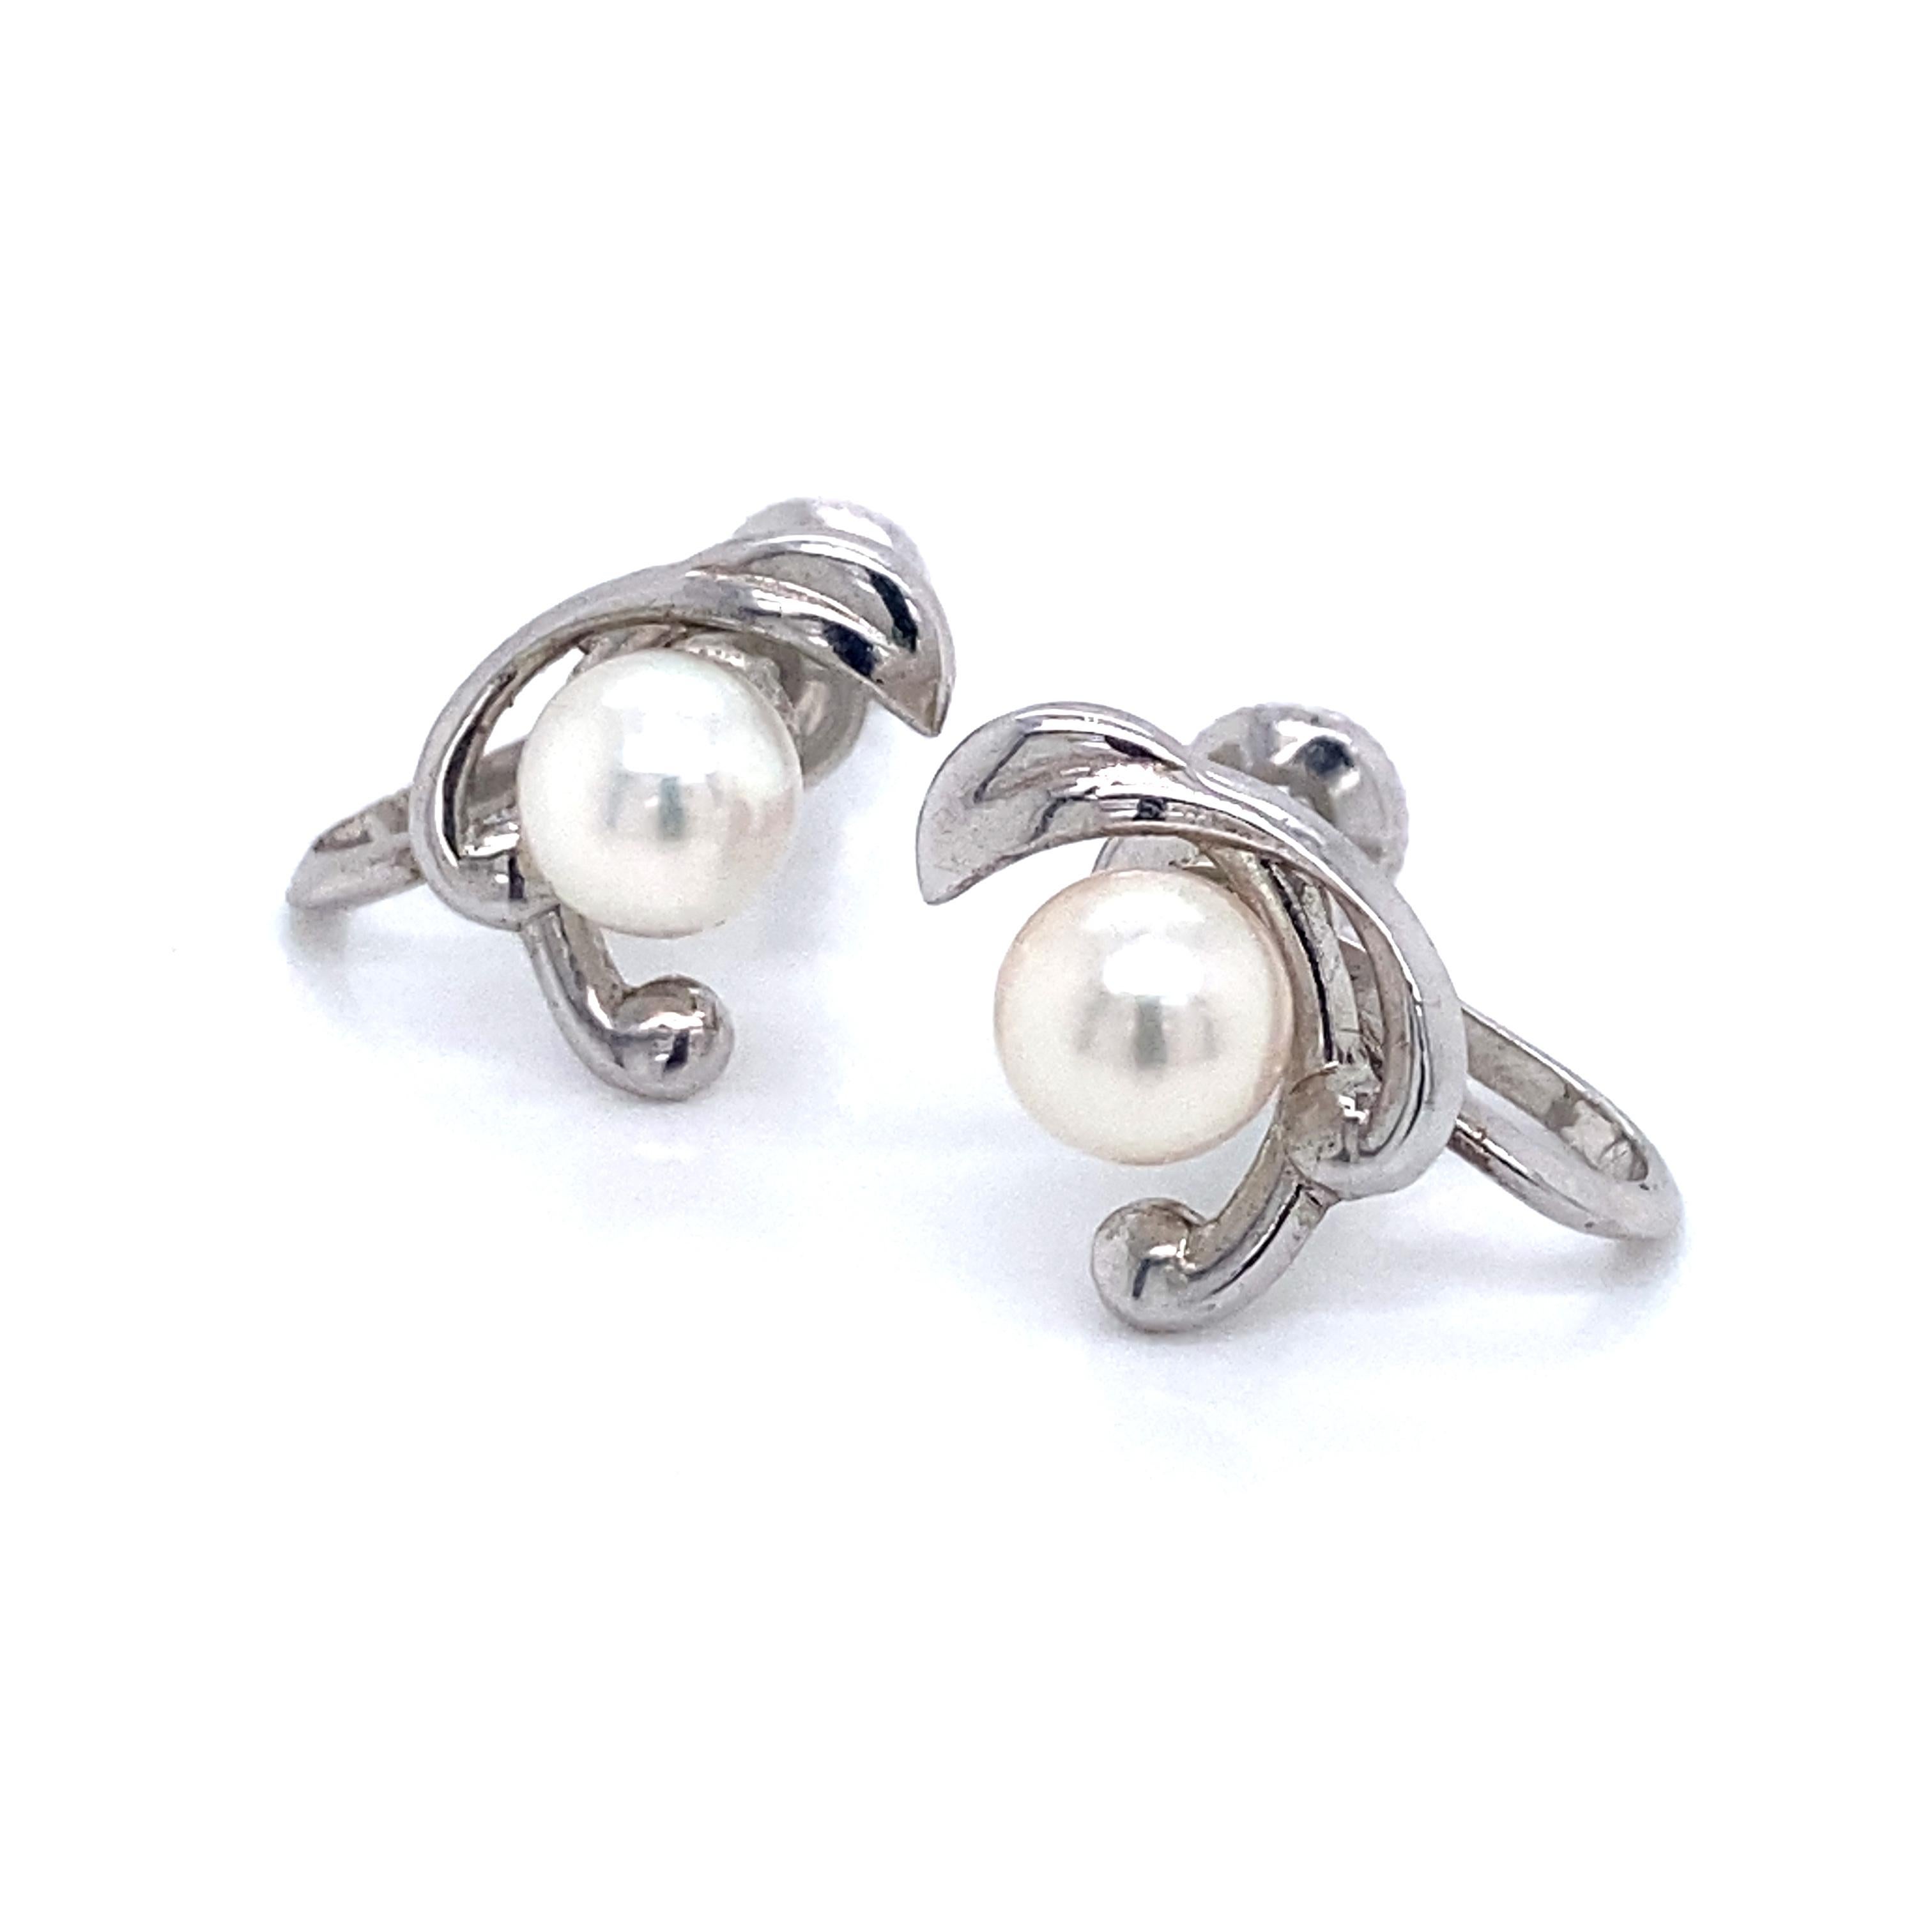 Mikimoto Estate Akoya Pearl Clip on Earrings Sterling Silver 3.53 Grams For Sale 6